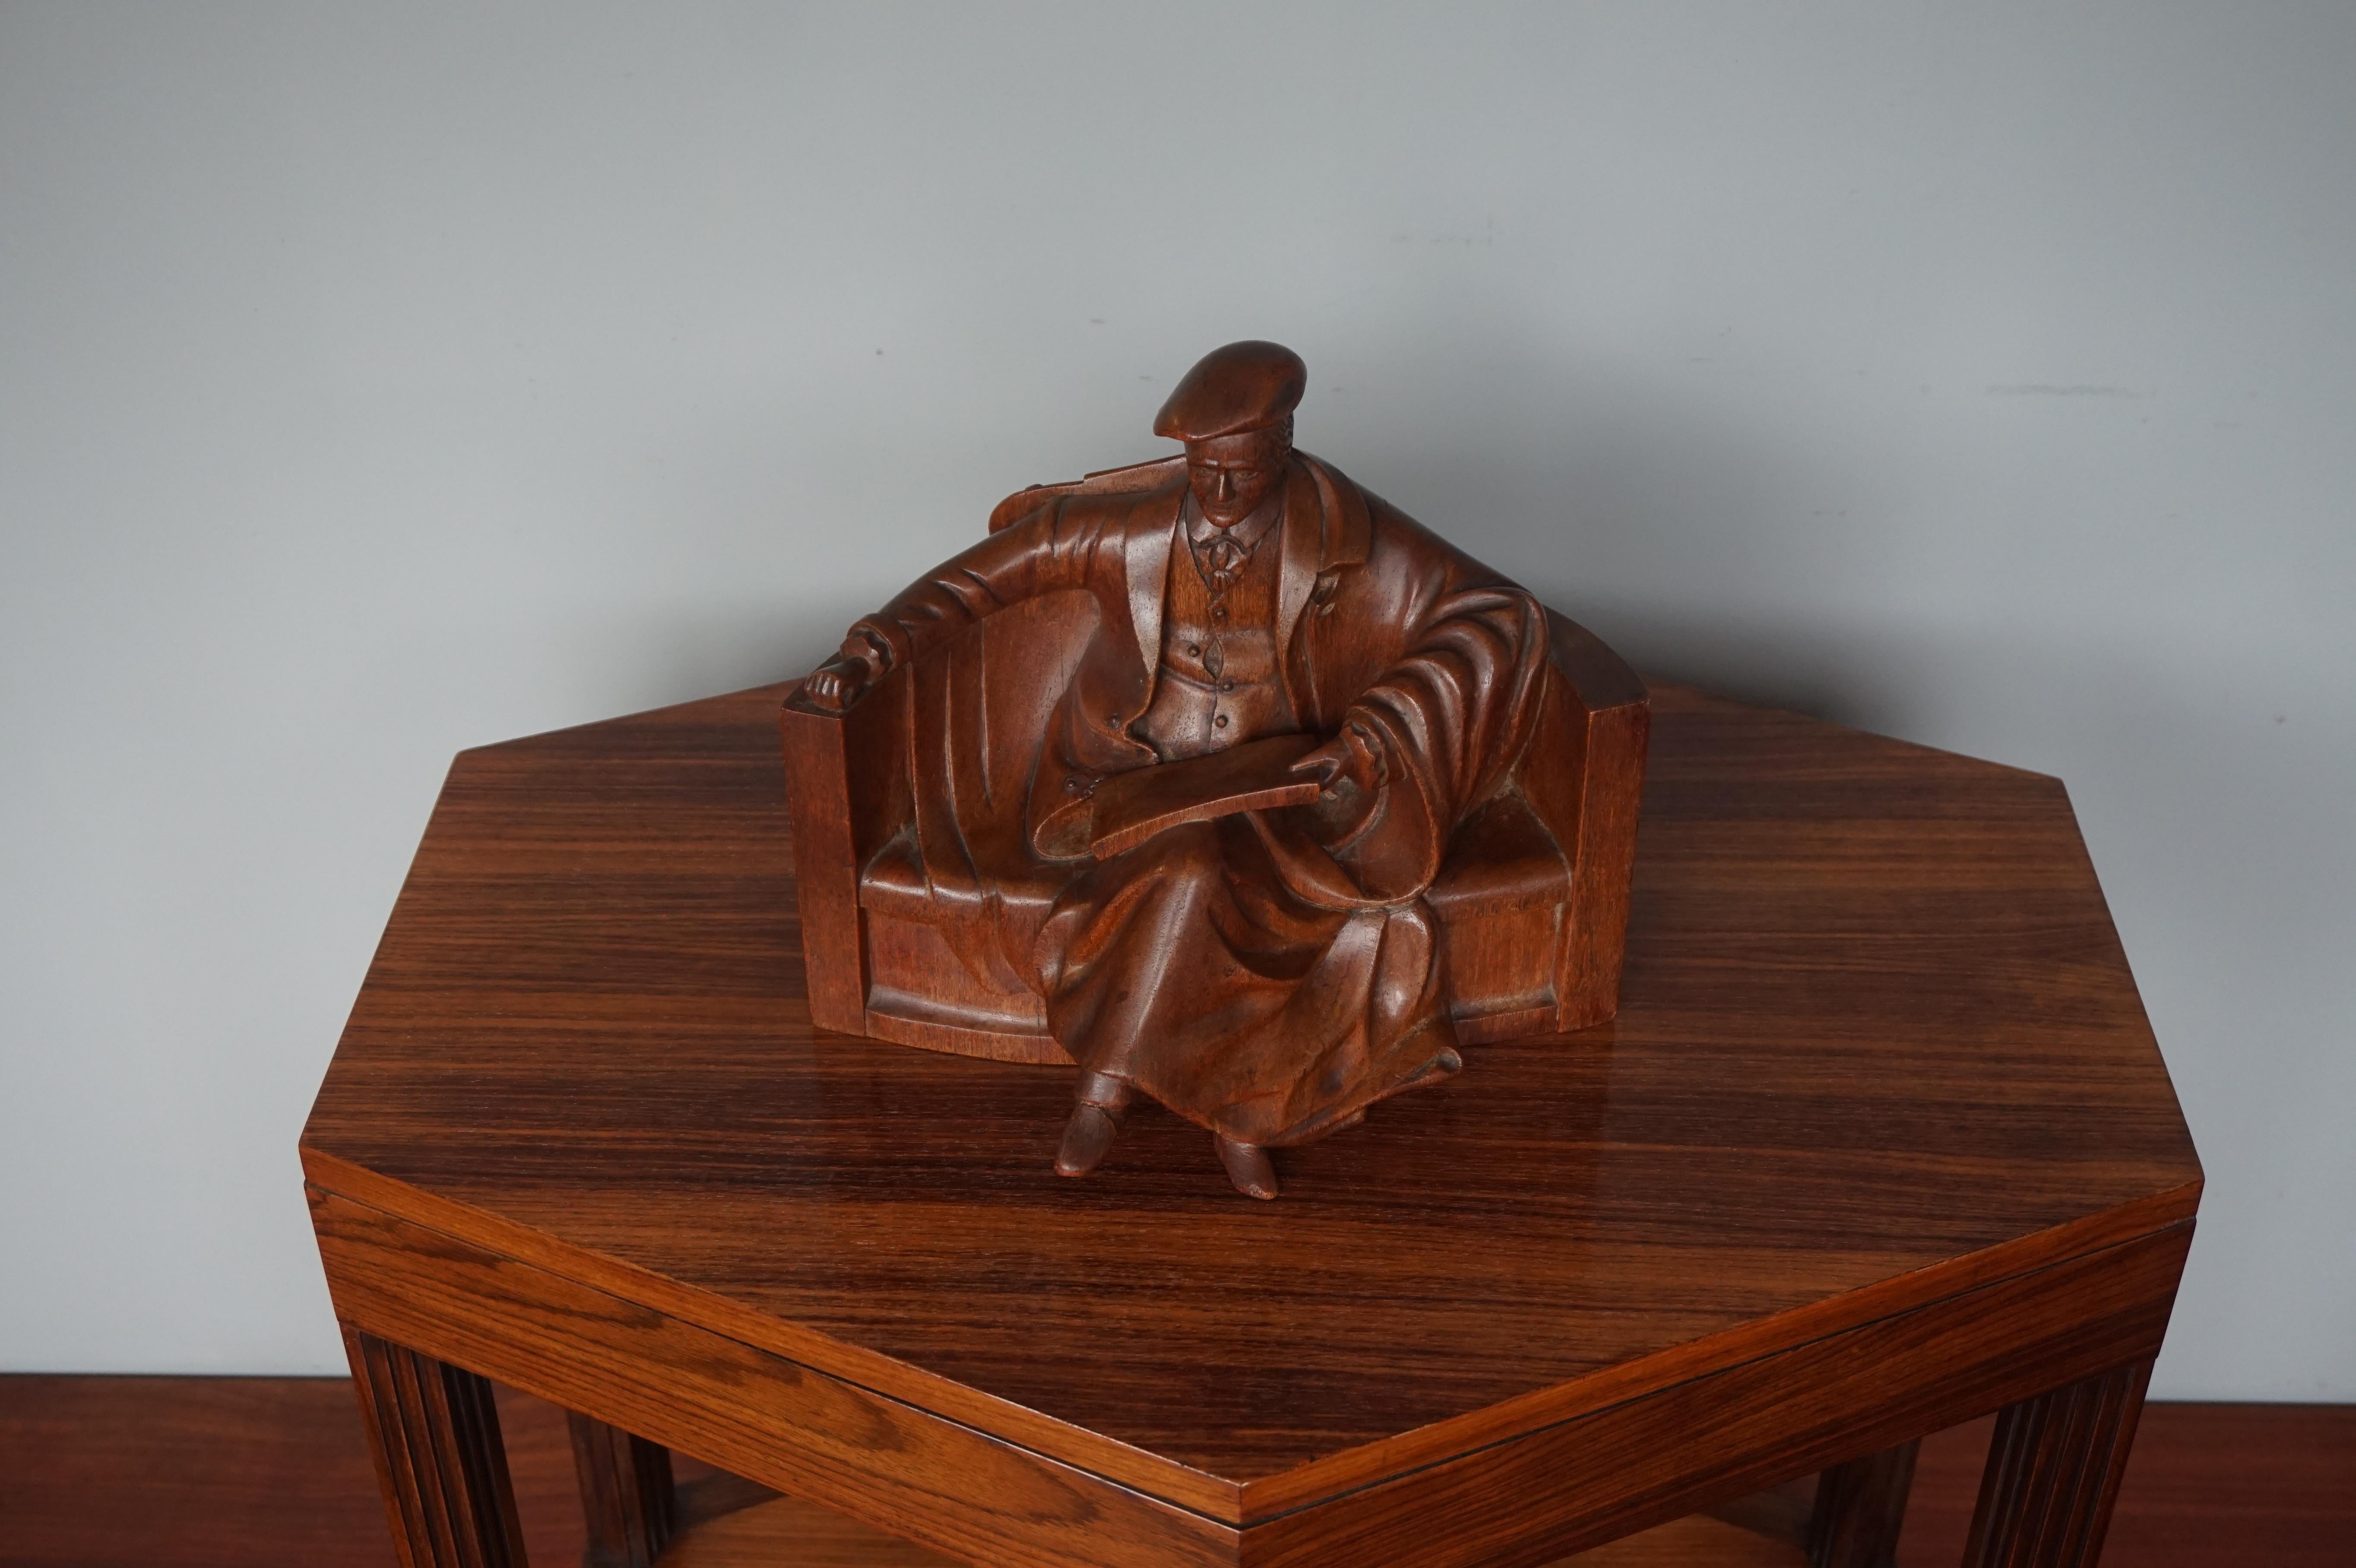 Unique & Stylish Sculpture of a Seated Scholar / Academic Made of Solid Teakwood 11